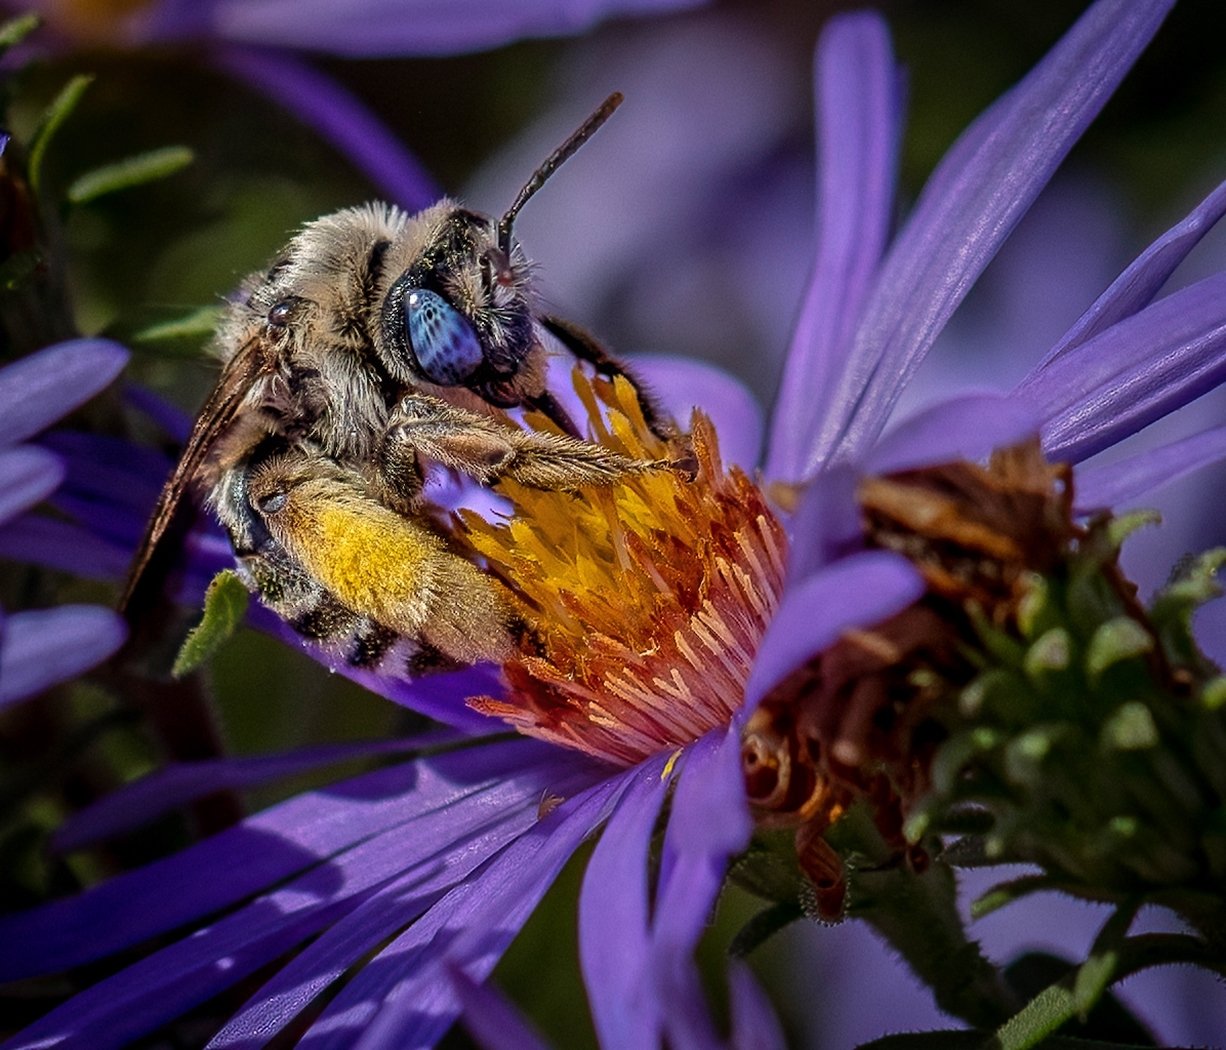 Bee, Fred Land,	Cowtown Camera Club, 1st